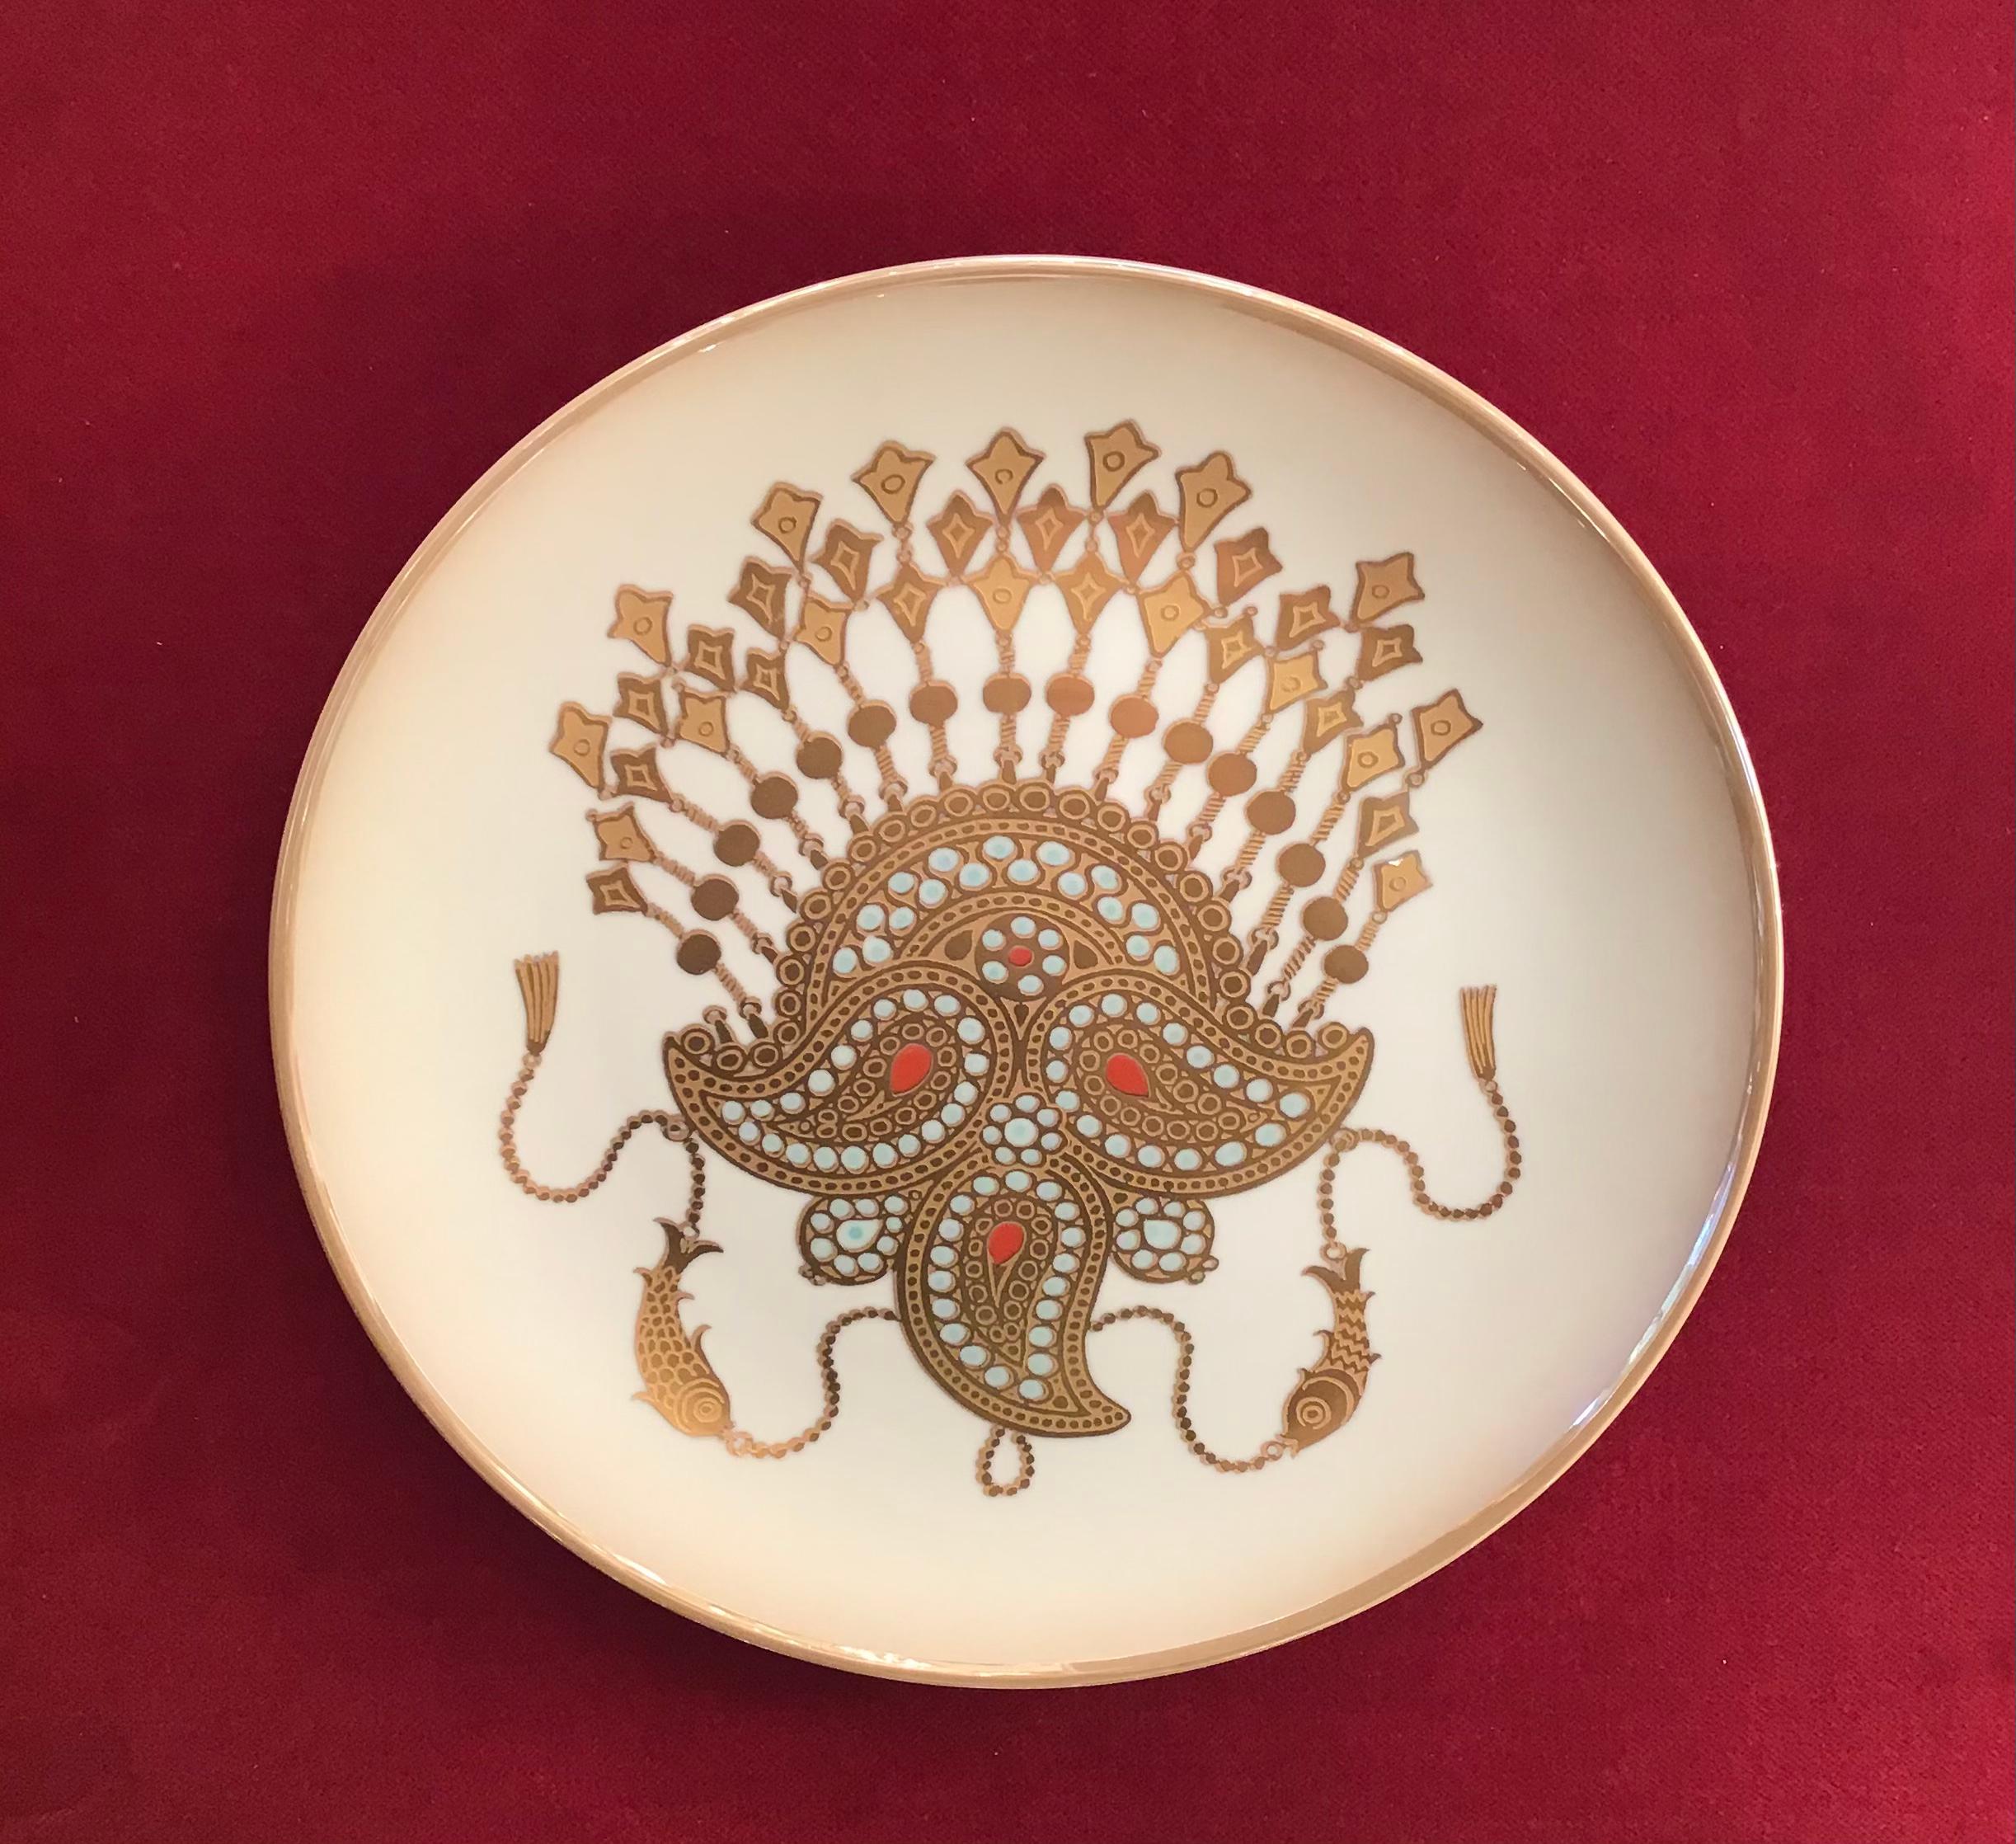 Morbelli Porcelain Wall Plates Worked with Pure Gold 1960 Italy For Sale 9